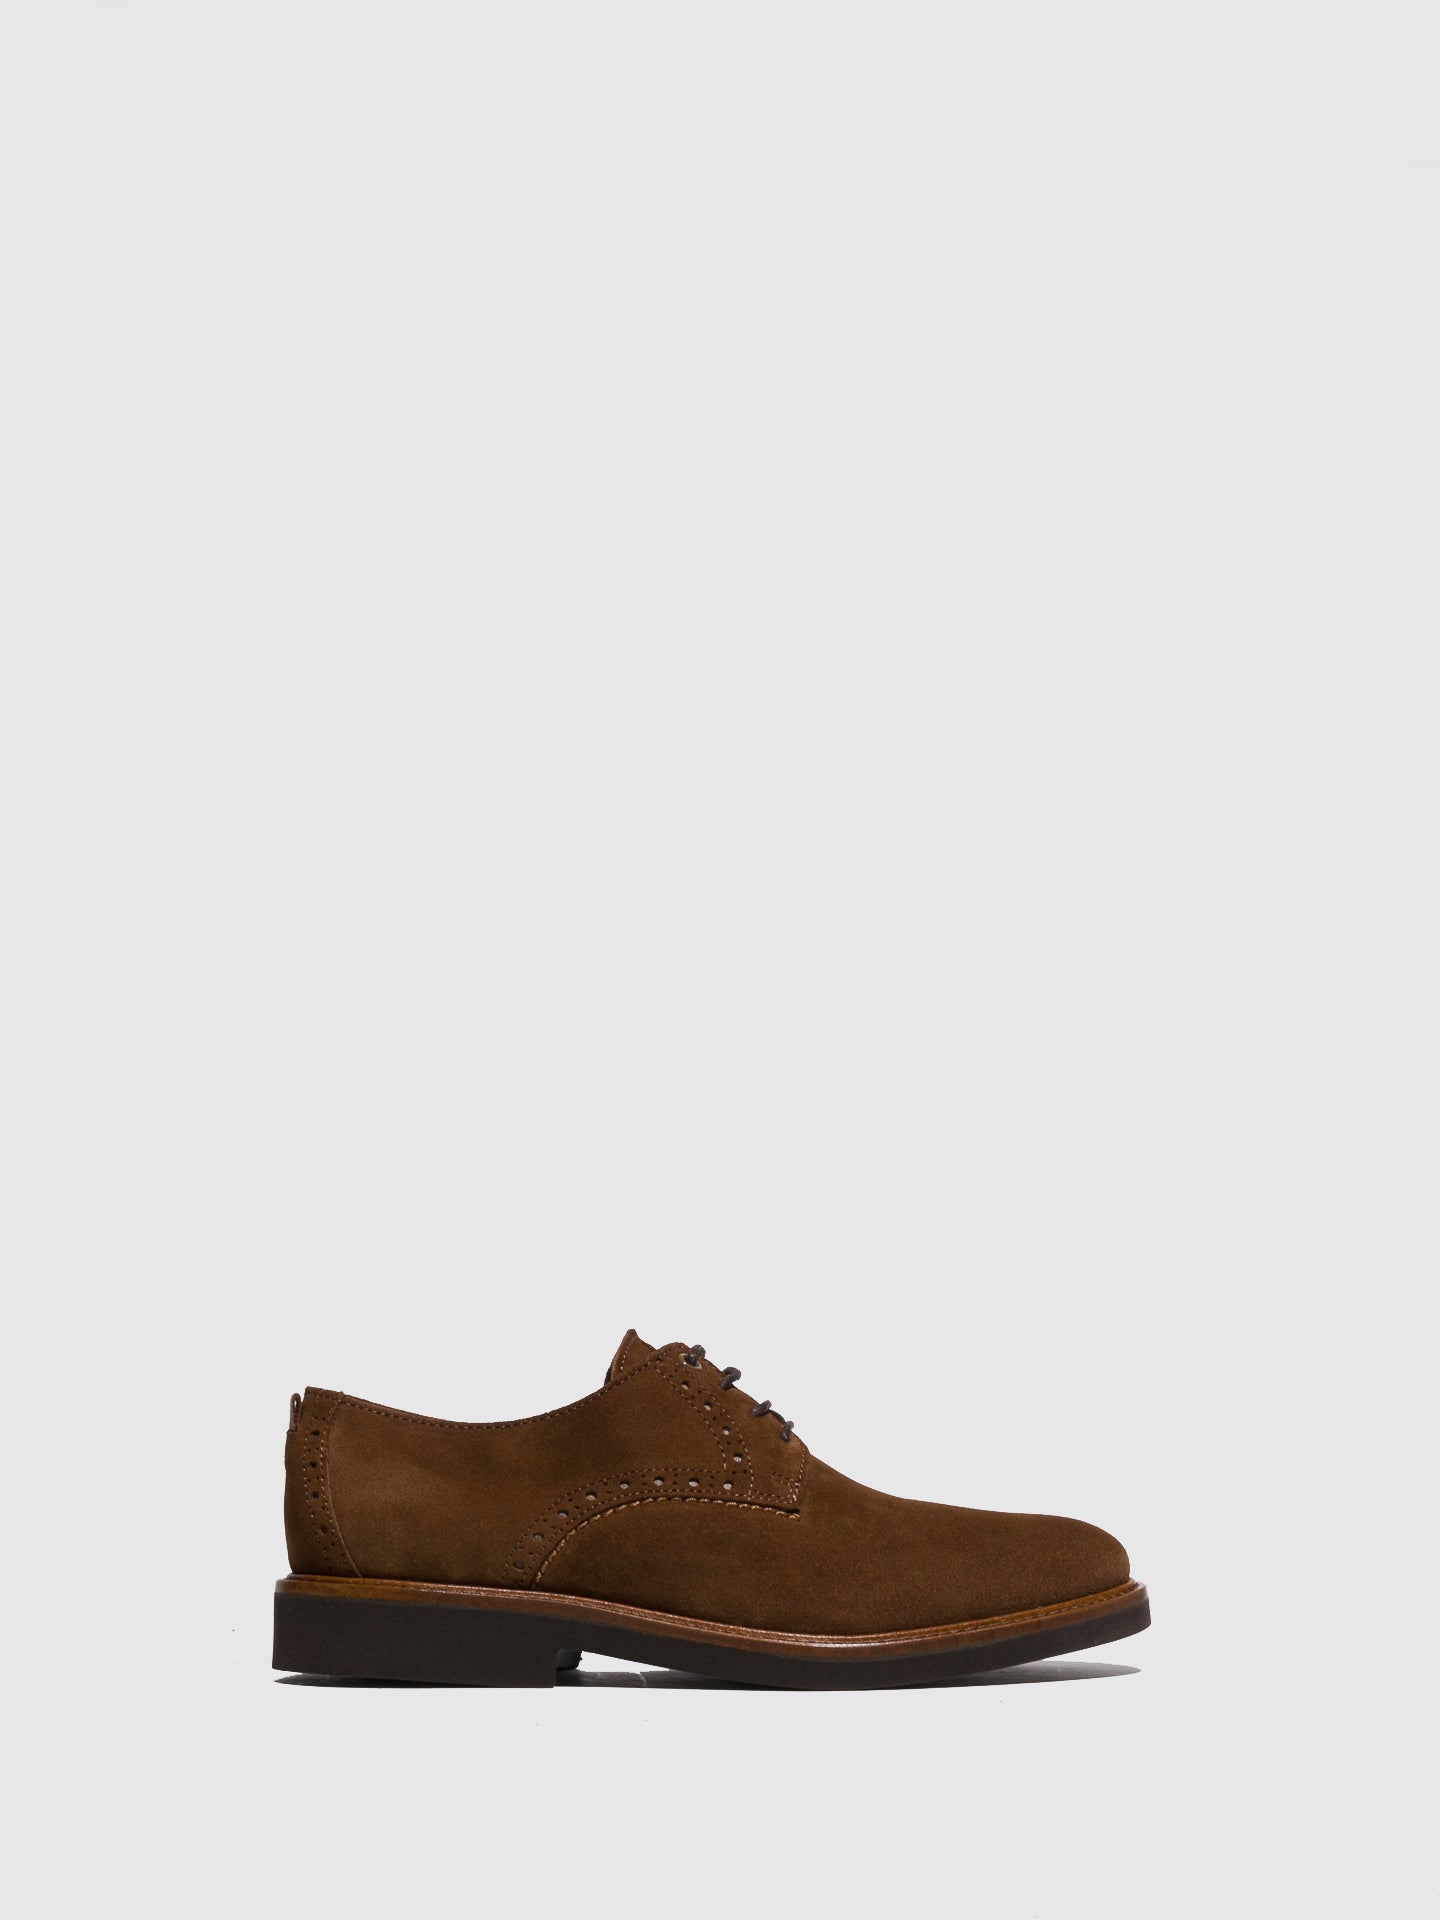 Foreva Camel Lace-up Shoes